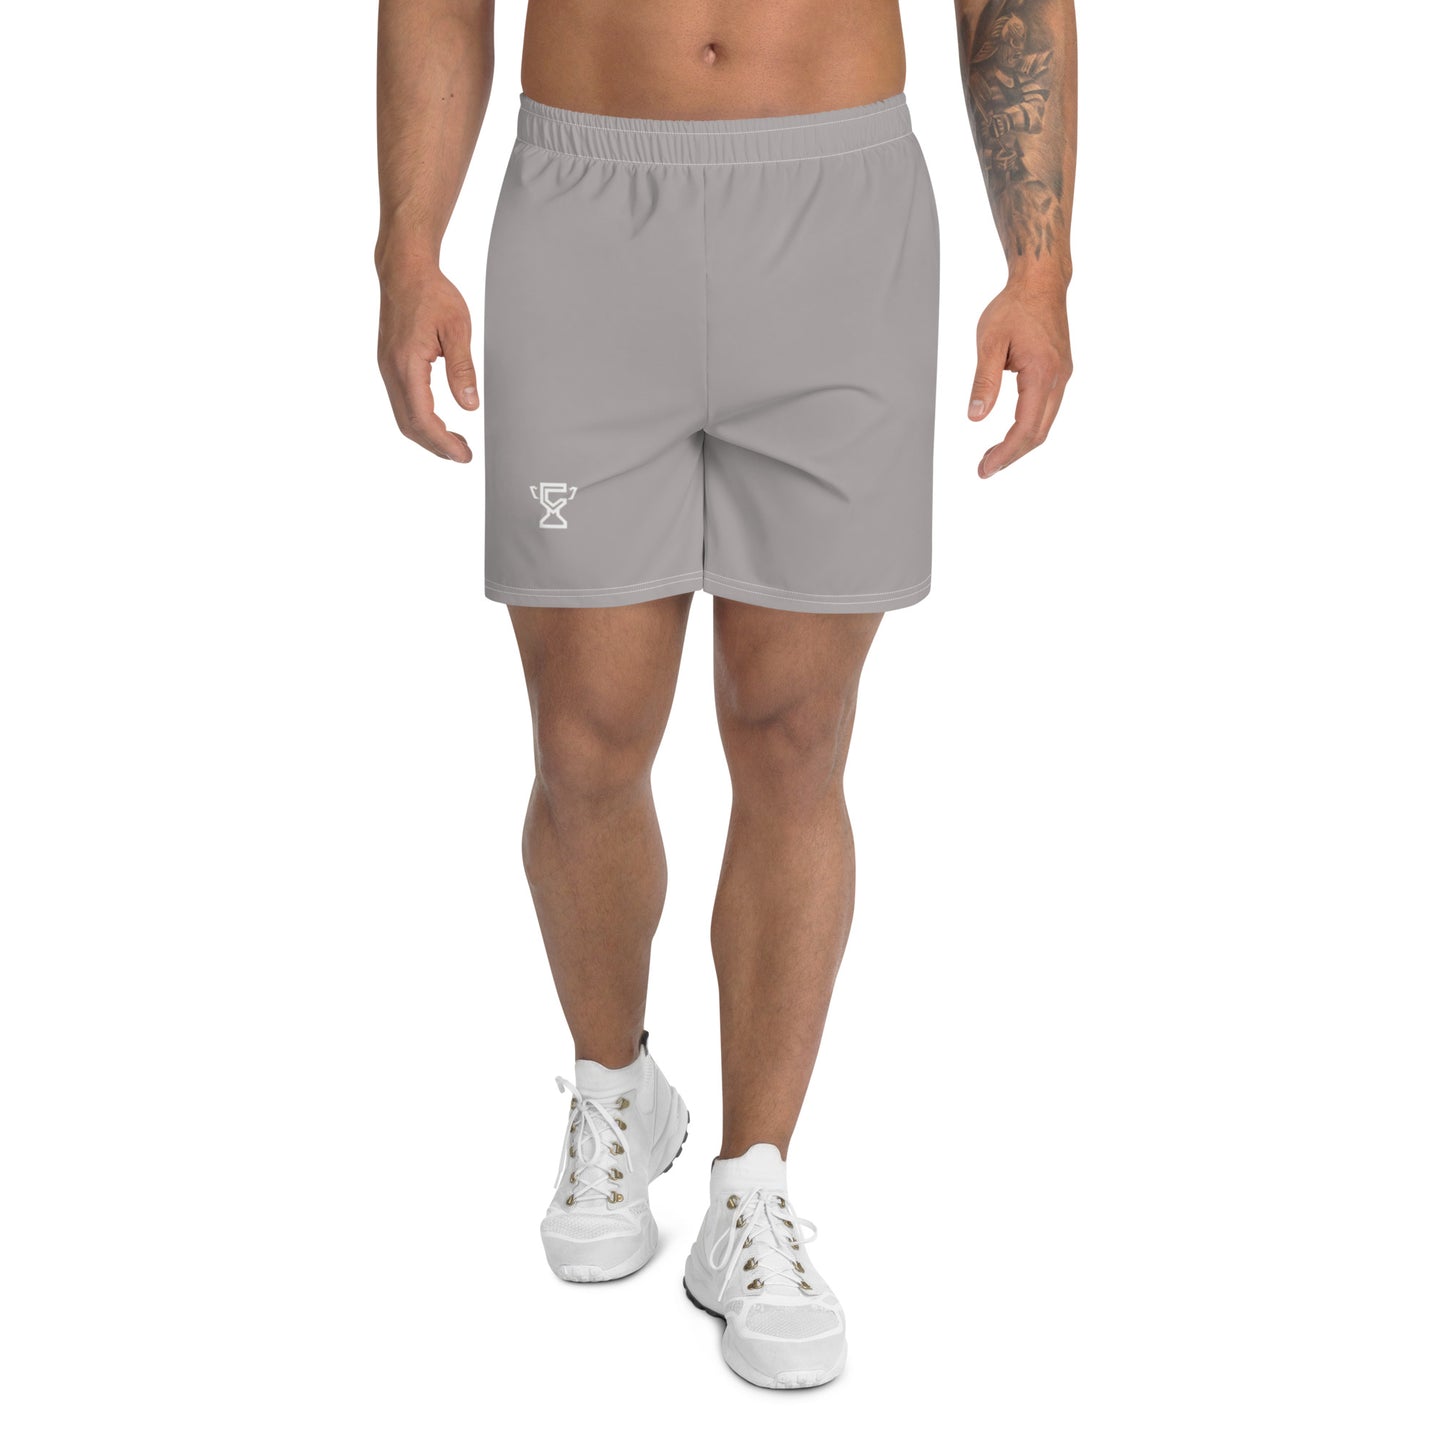 Front facing view of the gray Champletes Light Speed shorts.